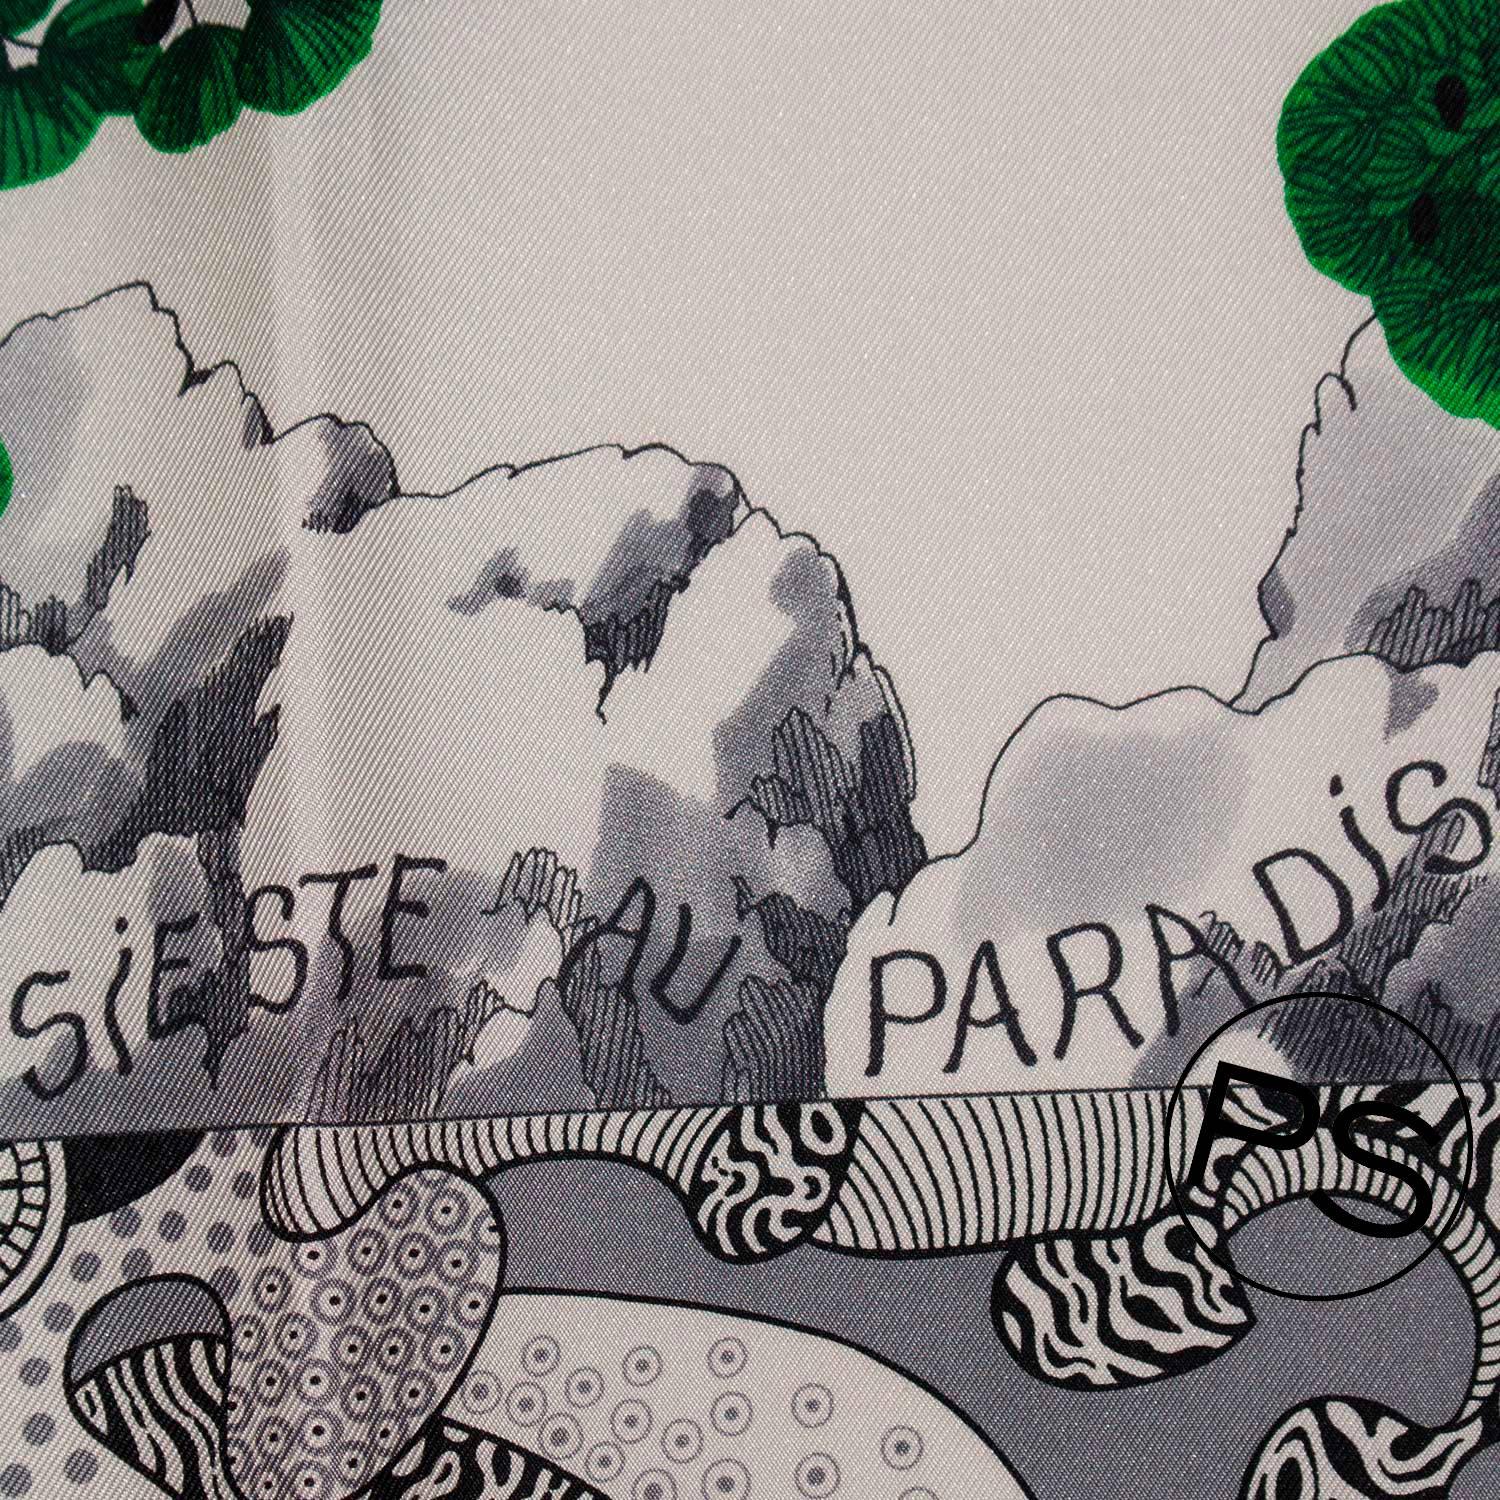 Hermes Carre Twill Sieste au Paradis White, Black, Green 2015.

Pre-owned and never used.

Bought it in Hermes store in 2015.

Model; Sieste au Paradis

Composition; 100% Silk.

Size; 90cm x 90cm.

Color; Blanc, Noir, Vert.

-Original